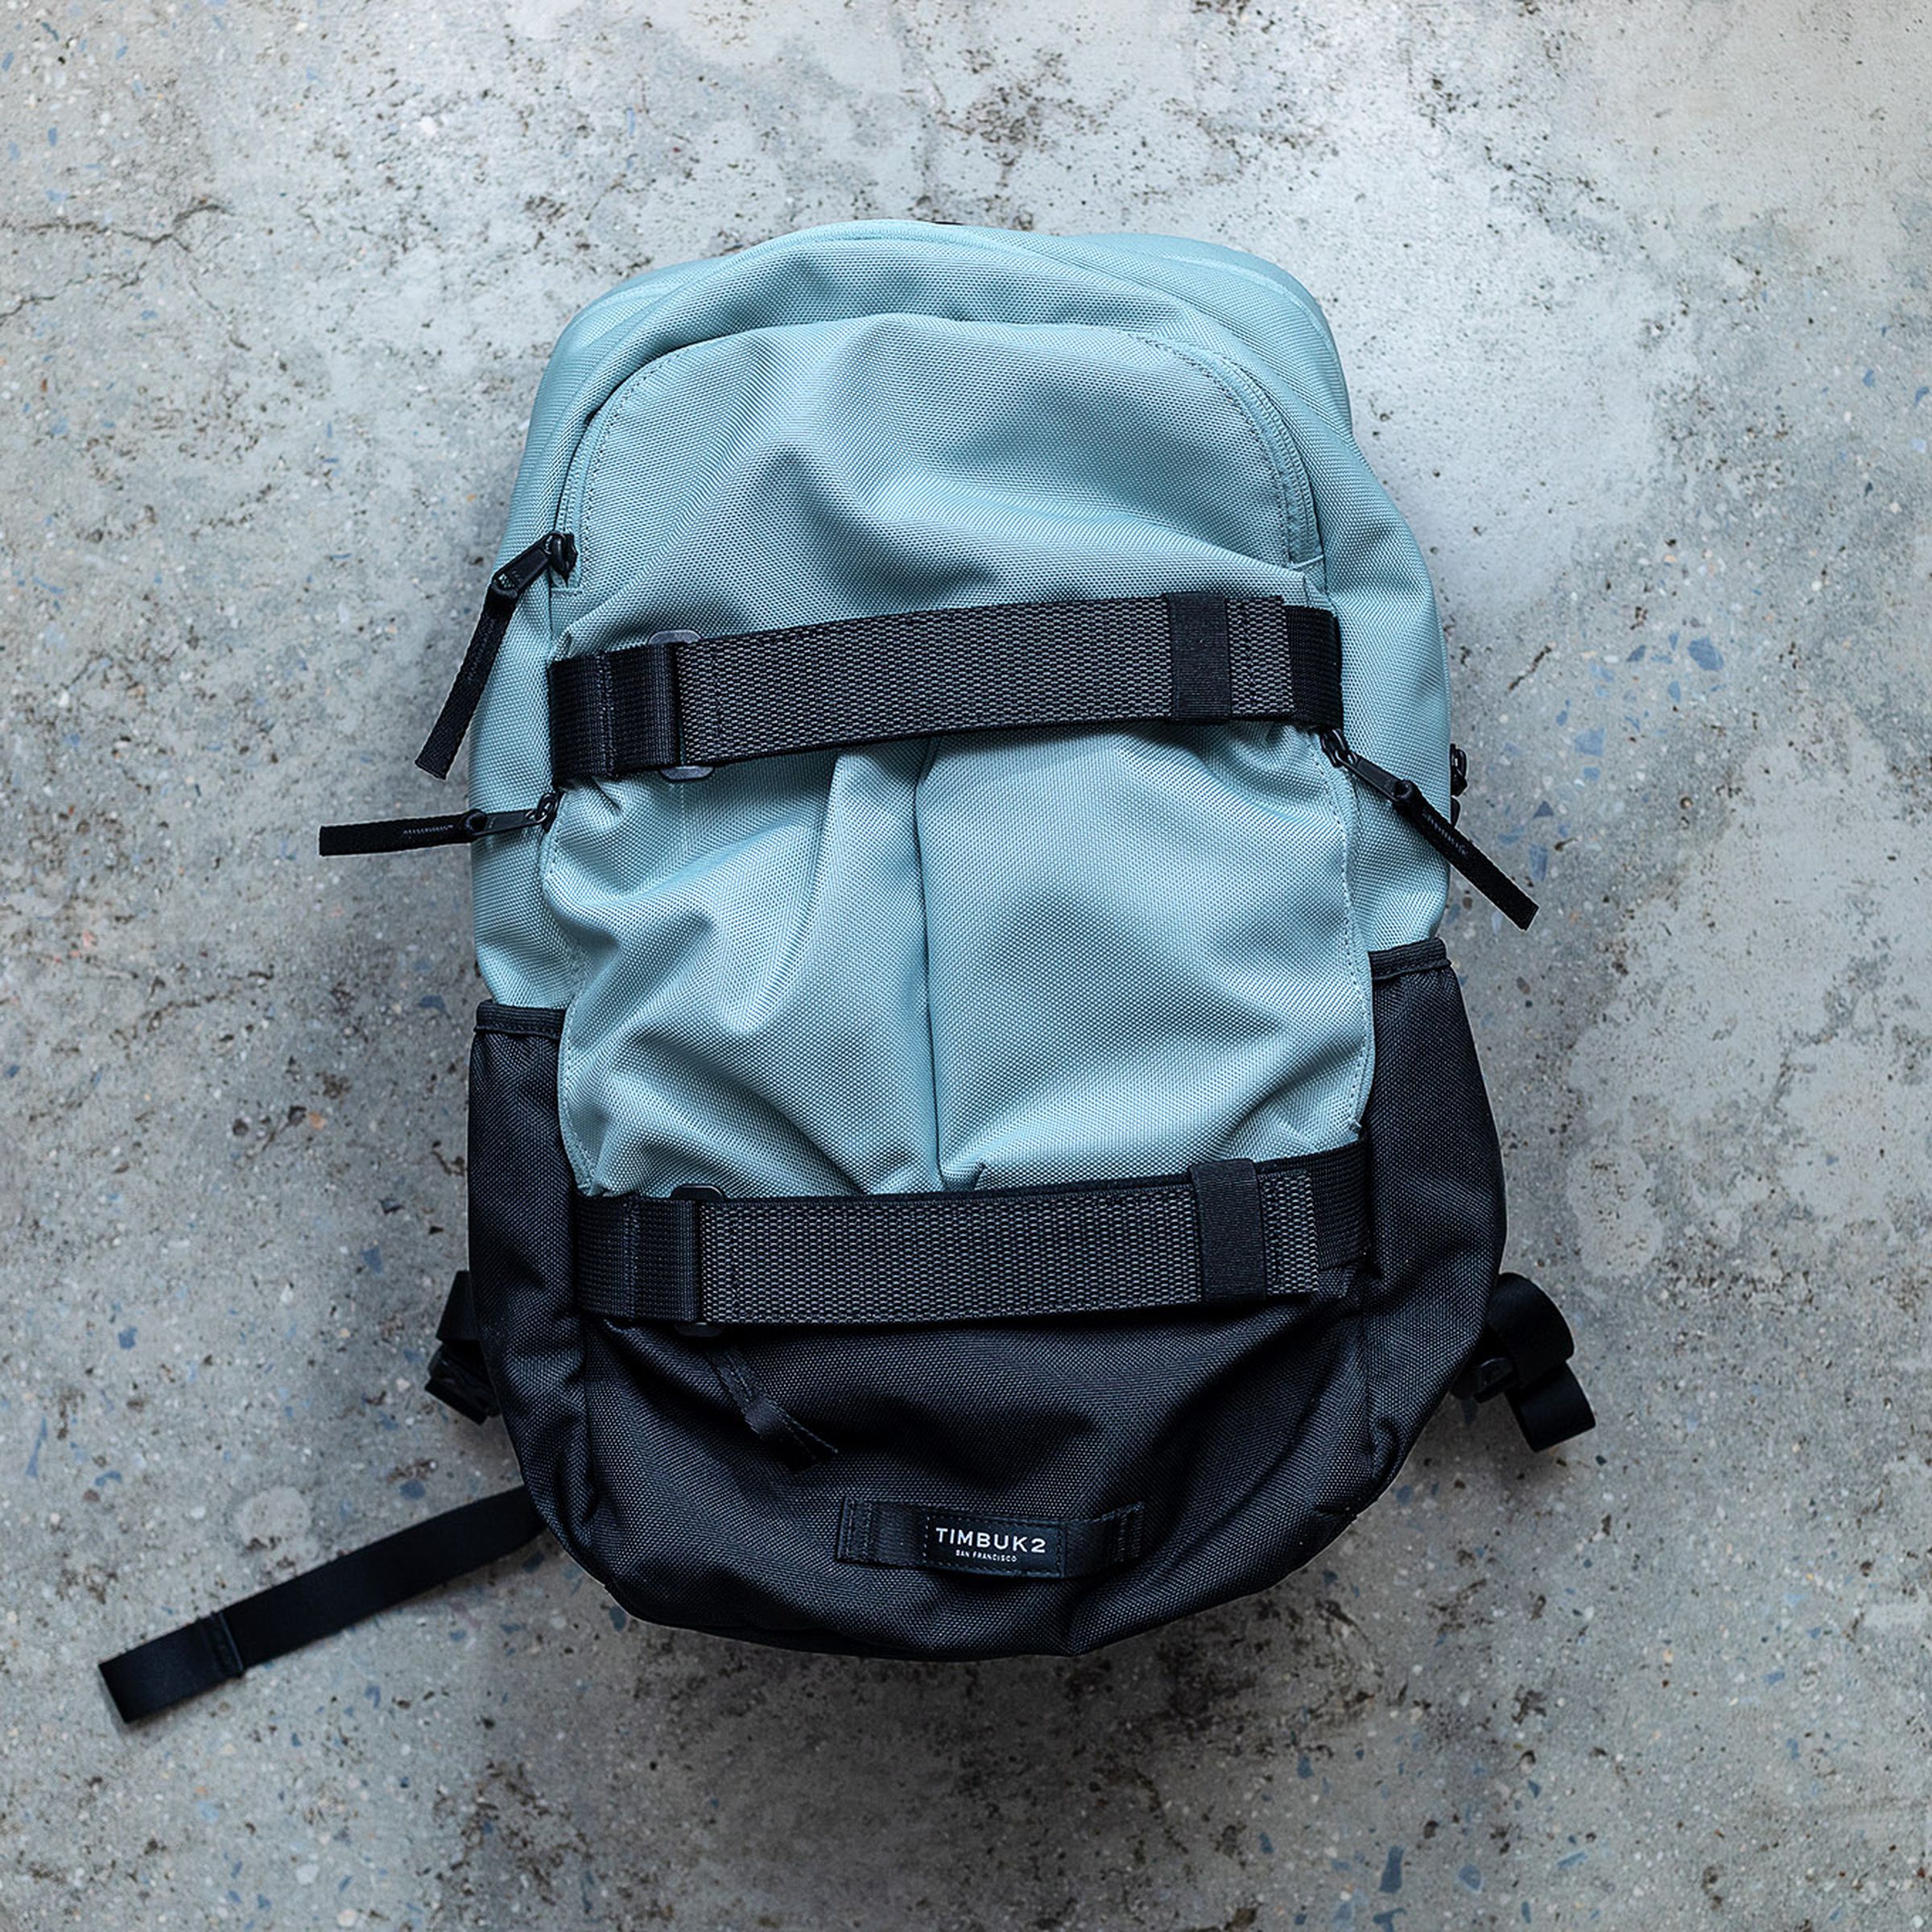 A two-tone light-blue / black backpack laying on a gray concrete floor, with its rear side pointing upwards toward the camera.